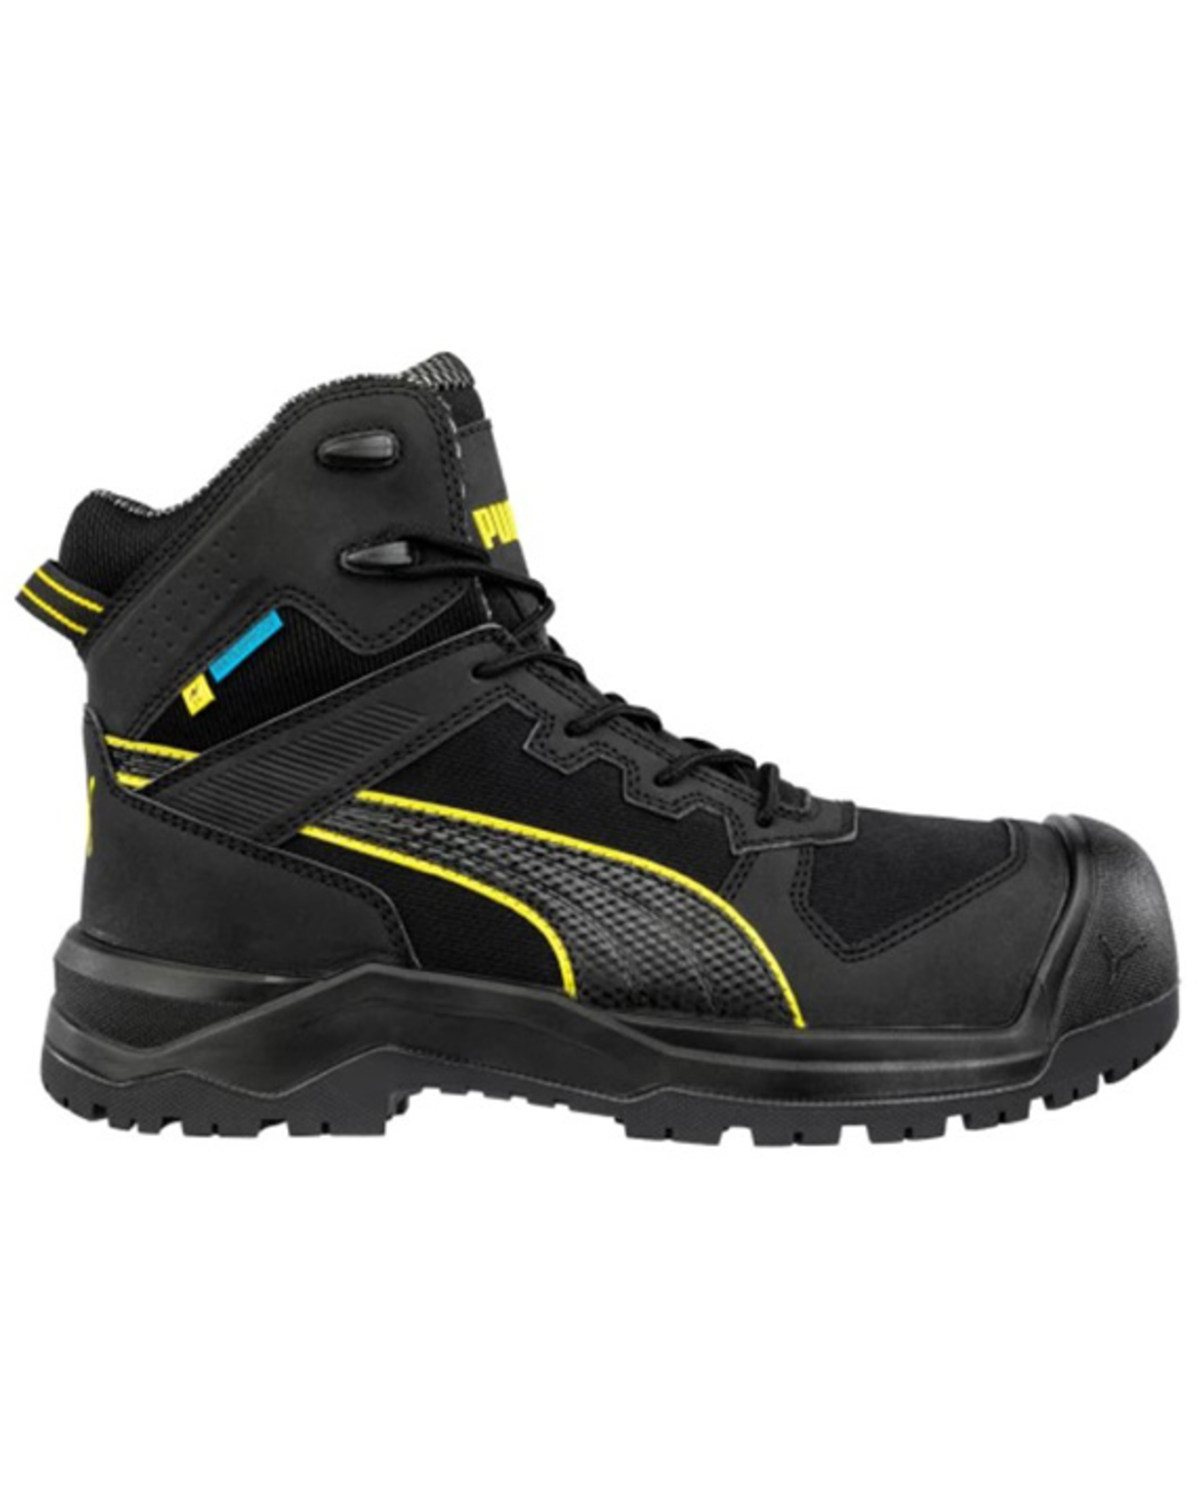 Puma Safety Men's Rock HD Mid Work Boots - Composite Toe